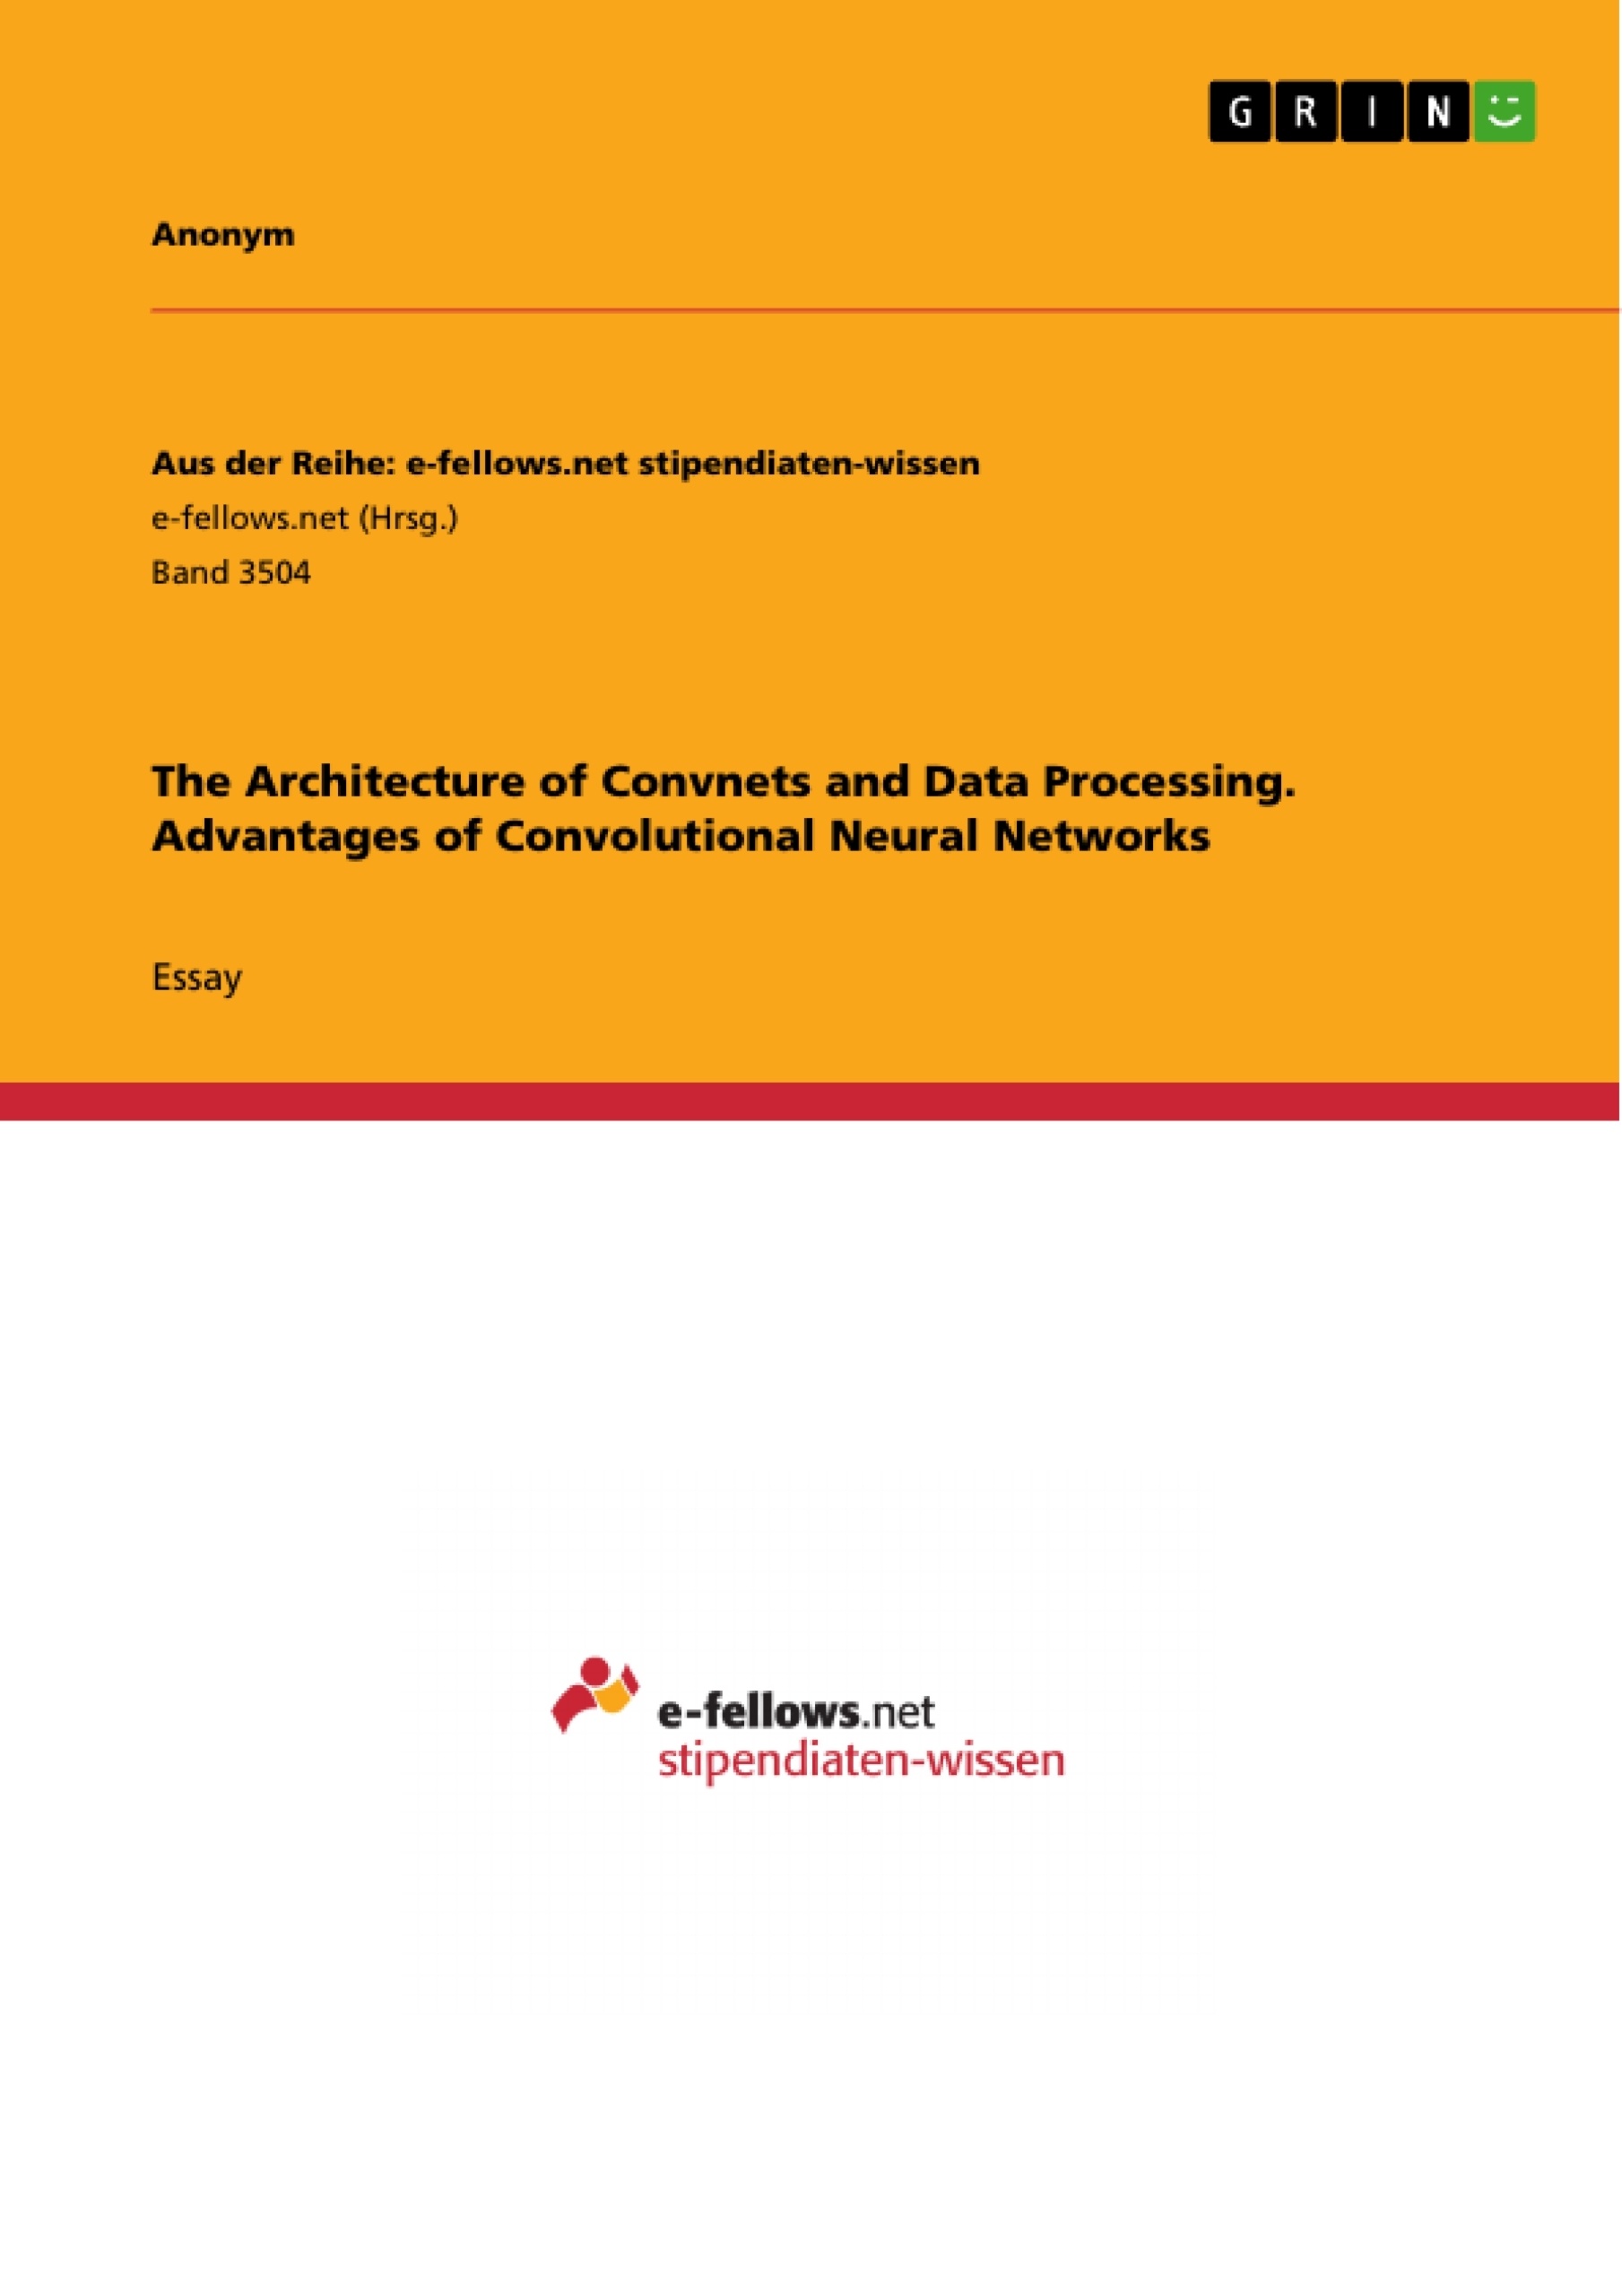 Title: The Architecture of Convnets and Data Processing. Advantages of Convolutional Neural Networks